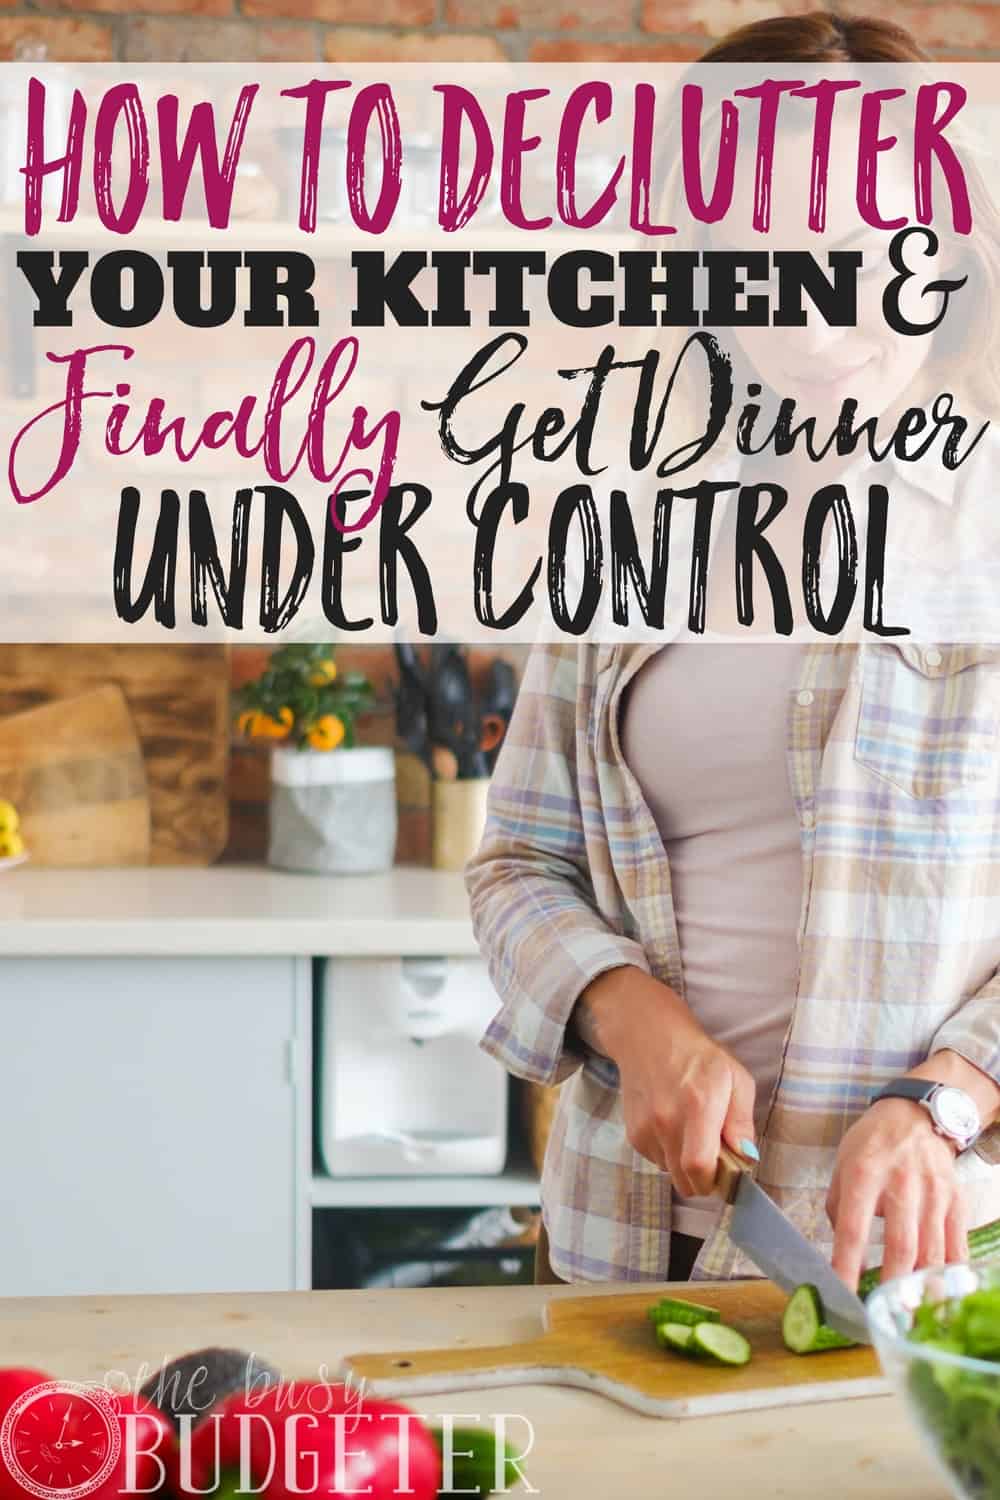 I would let my kitchen get so cluttered that I would have no motivation to cook or even clean it. It would just look so bad that I would get overwhelmed with the work needed to declutter that I just wouldn't (and we would end up ordering take out). So I committed myself to decluttering, followed the steps in this article, and now cooking (and even cleaning) is so much less overhwelming.. it's almost ENJOYABLE!